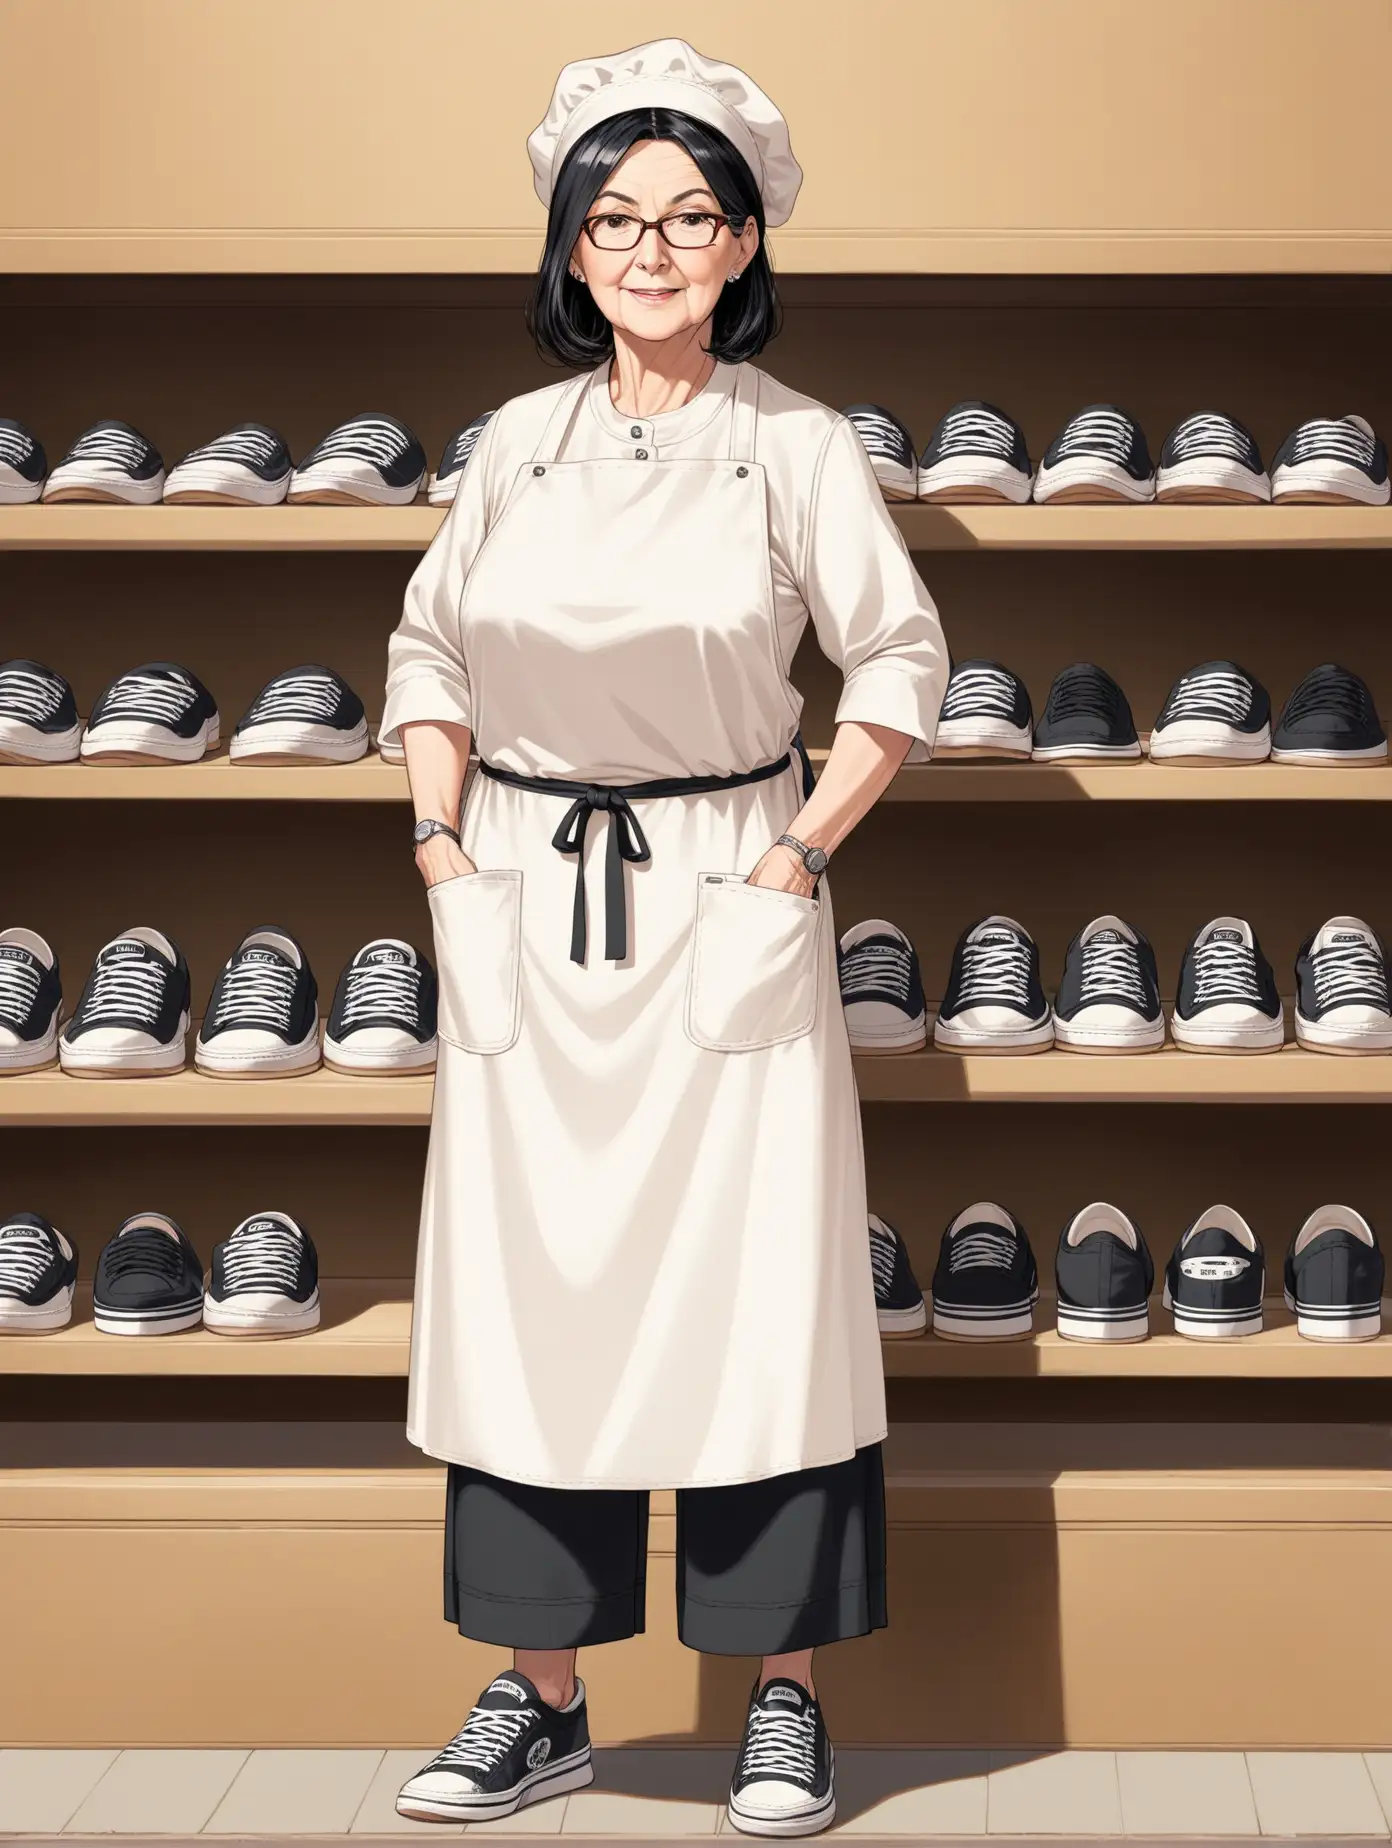 Experienced-Baker-Woman-in-Sneakers-Standing-Proudly